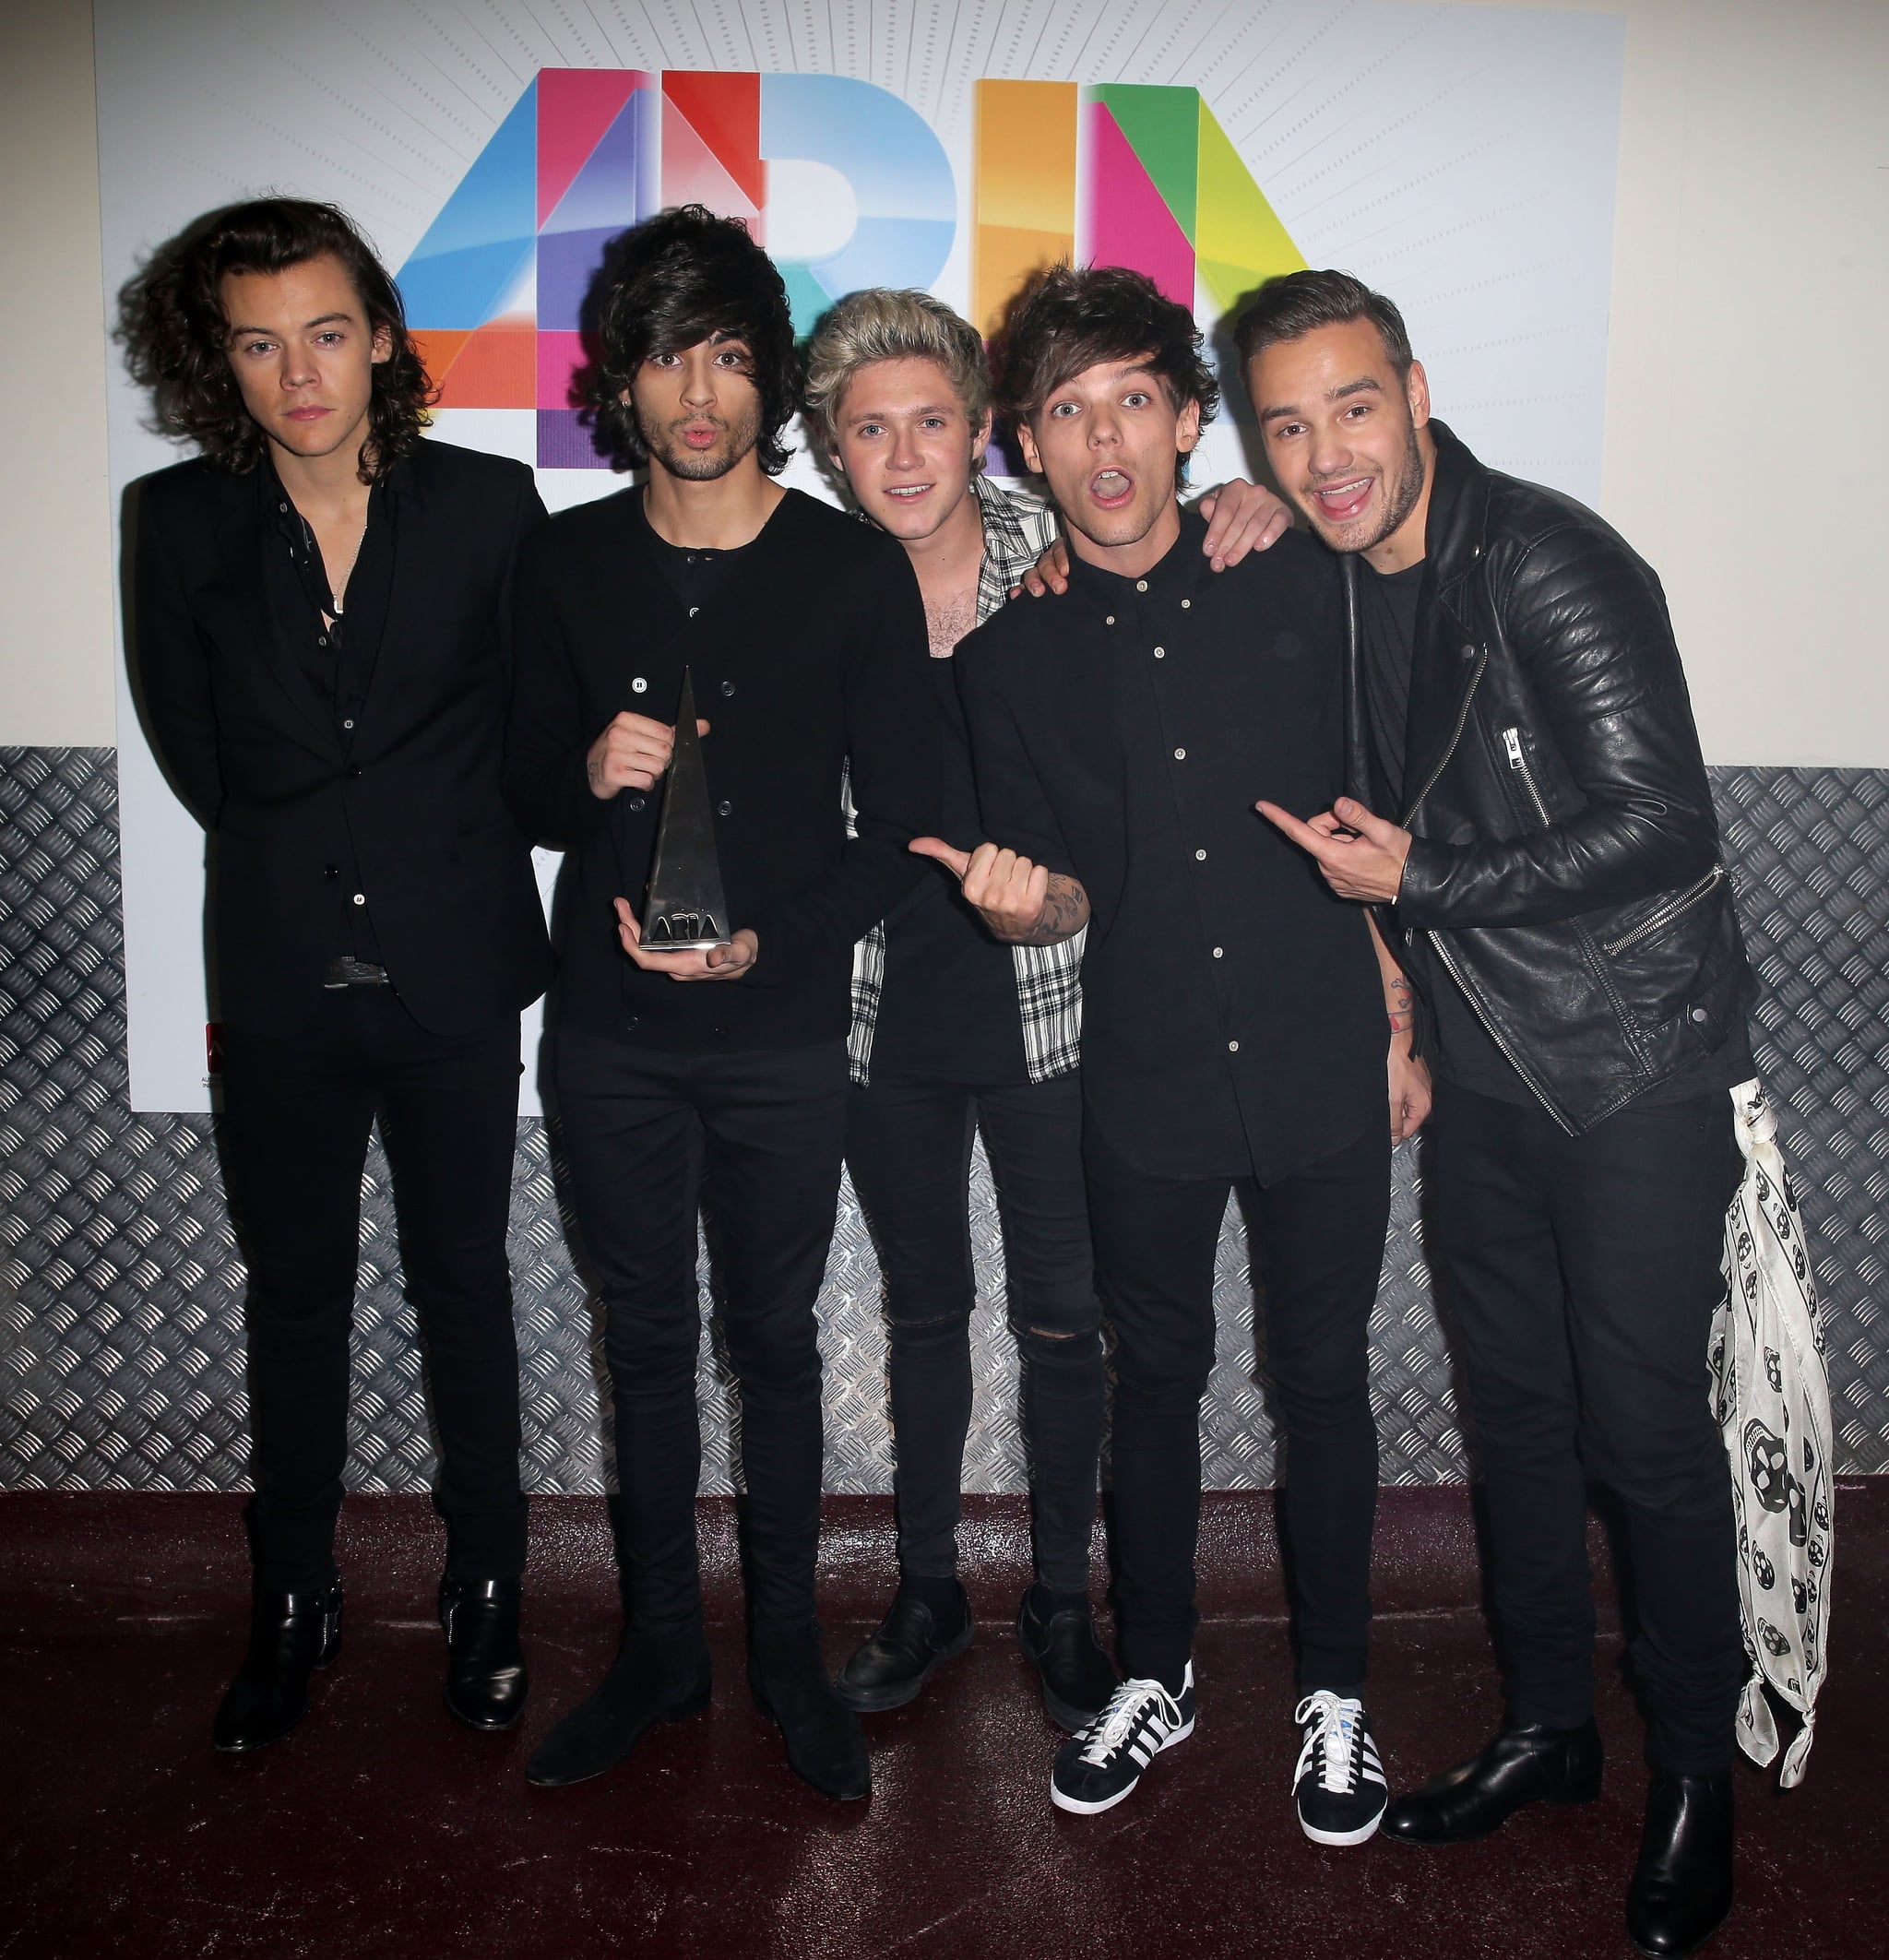 SYDNEY, AUSTRALIA - NOVEMBER 26:  (EXCLUSIVE COVERAGE) One Direction (L-R) Harry Styles, Zayn Malik, Niall Horan, Louis Tomlinson and Liam Payne pose for a portrait backstage during the 28th Annual ARIA Awards 2014 at the Star on November 26, 2014 in Sydney, Australia.  (Photo by Mark Metcalfe/WireImage)